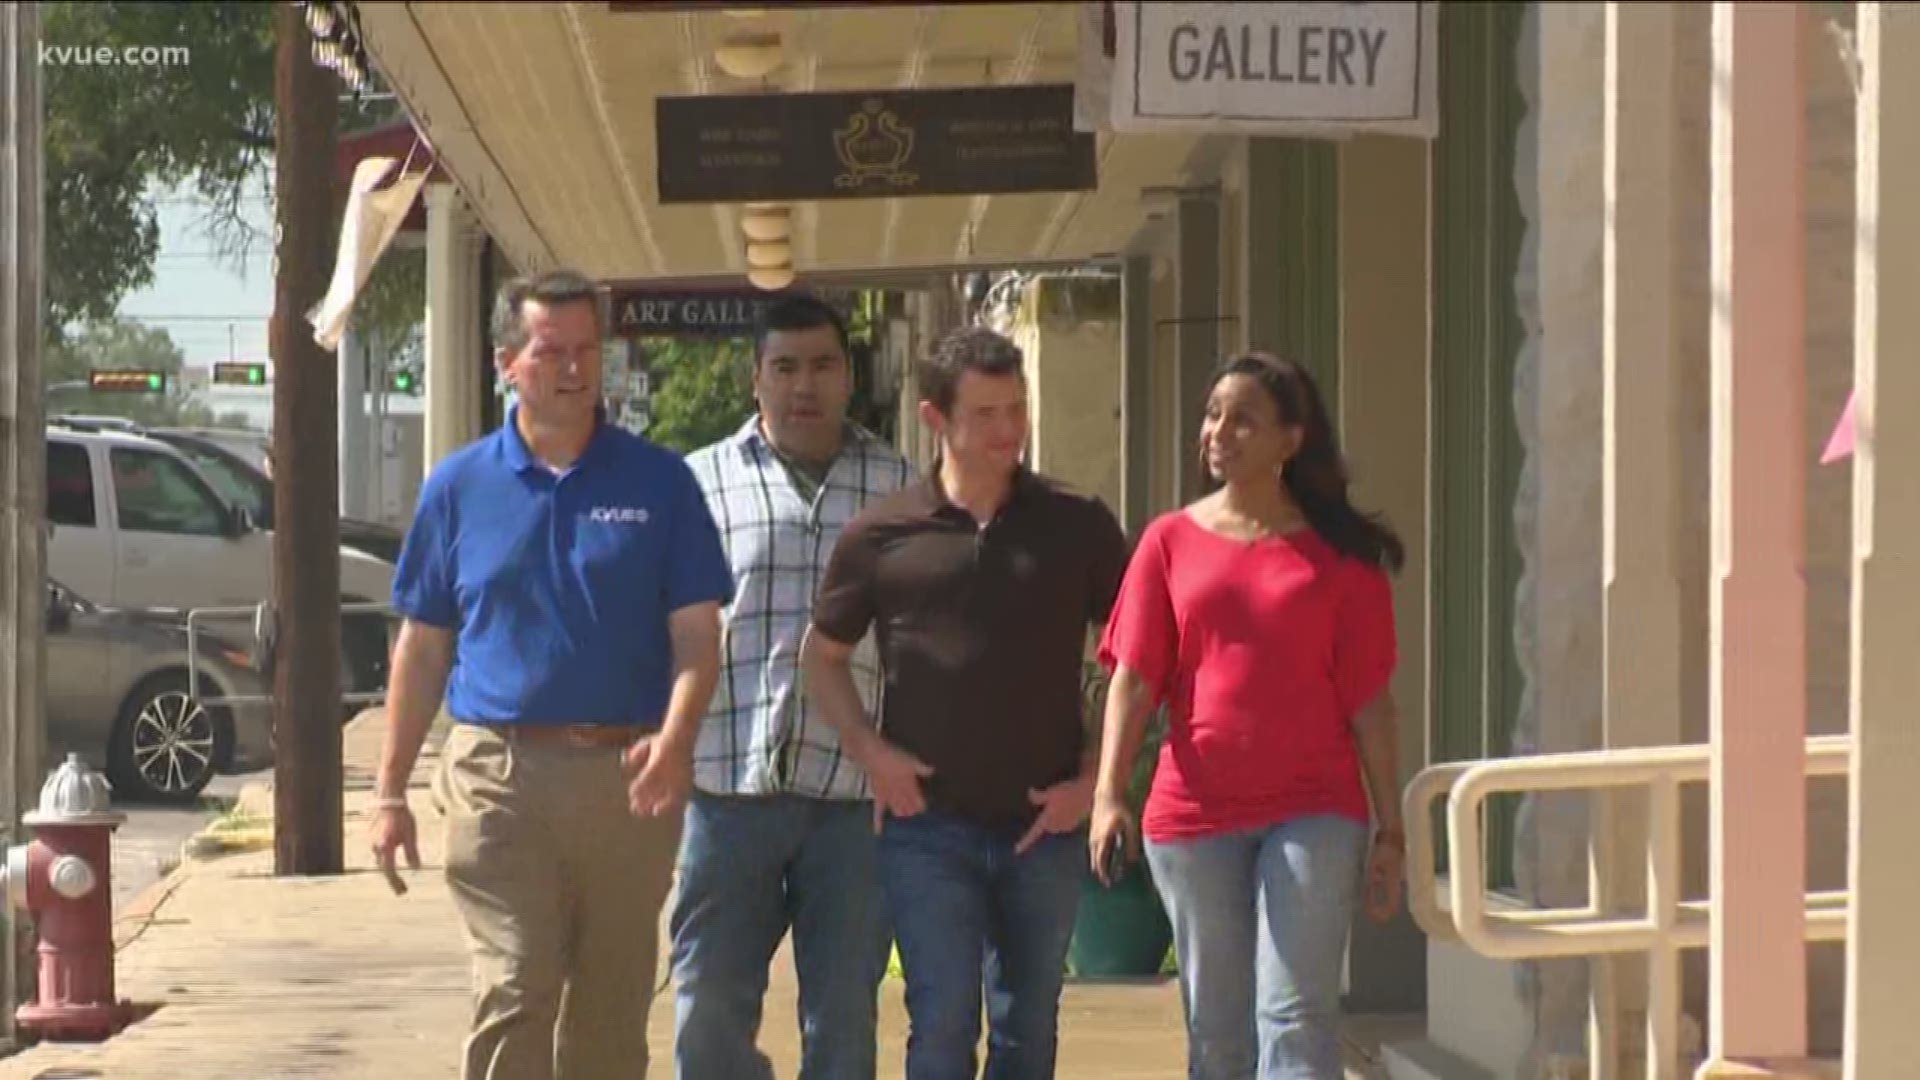 Fredericksburg is about an hour and 40 minute drive from Austin, so KVUE's Quita Culpepper, Mike Rush, Albert Ramon and Mike Barnes decided to say "guten tag" to this Central Texas town and see some of what makes this place so special.